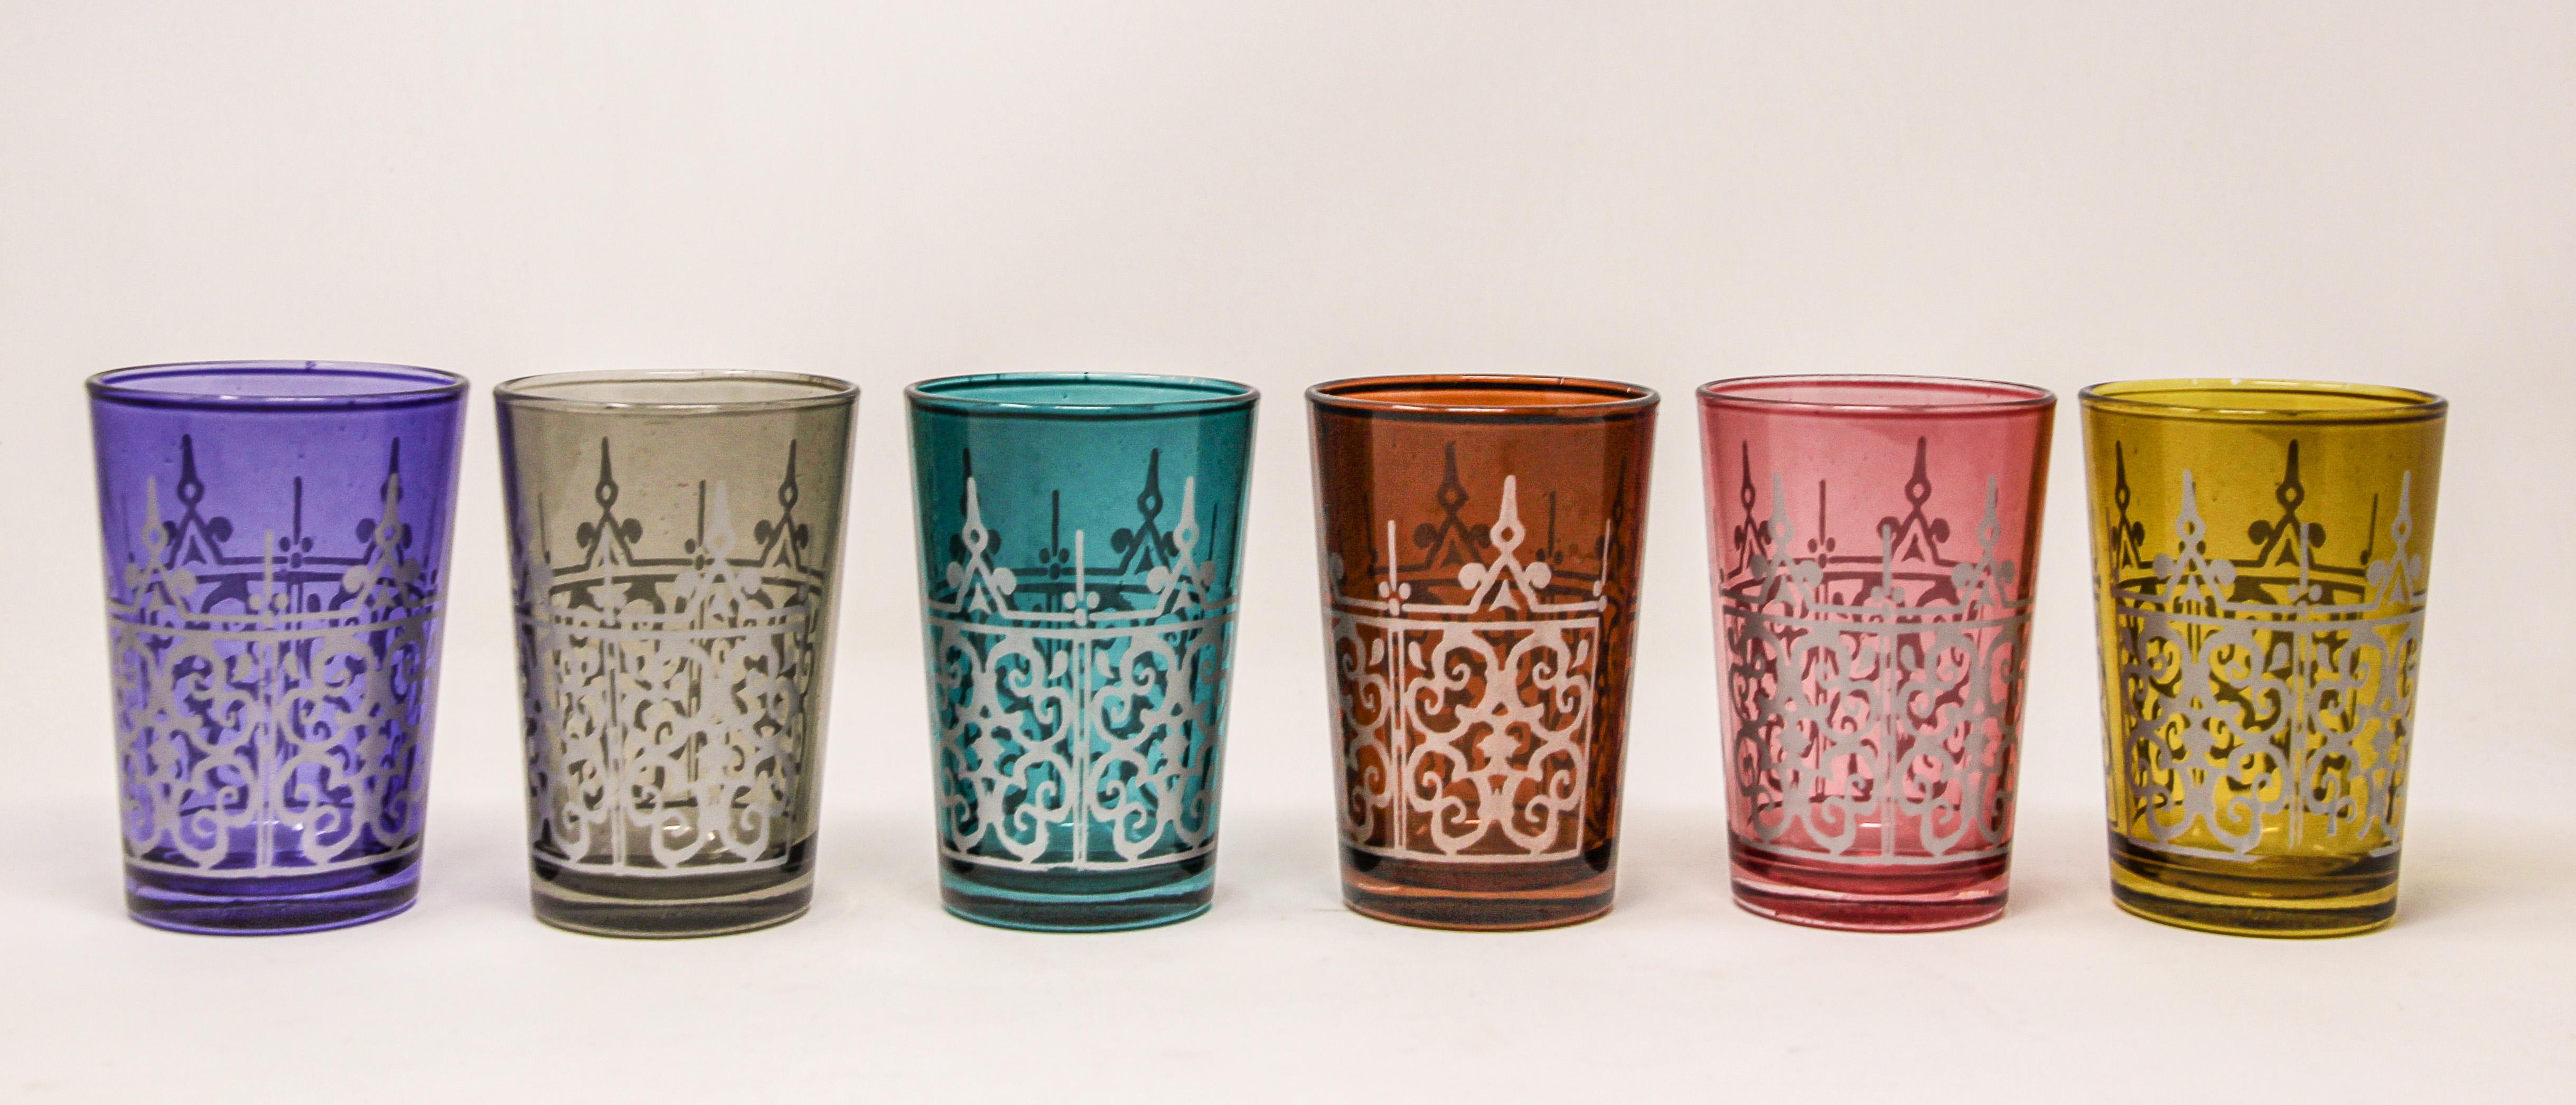 Set of six shot colored glasses with raised Moorish design.
Decorated with a classical pattern Moorish frieze.
One red, one purple, one orange, one blue, one violet, one grey.
Use these elegant glasses for Moroccan tea, or any hot or shot cold